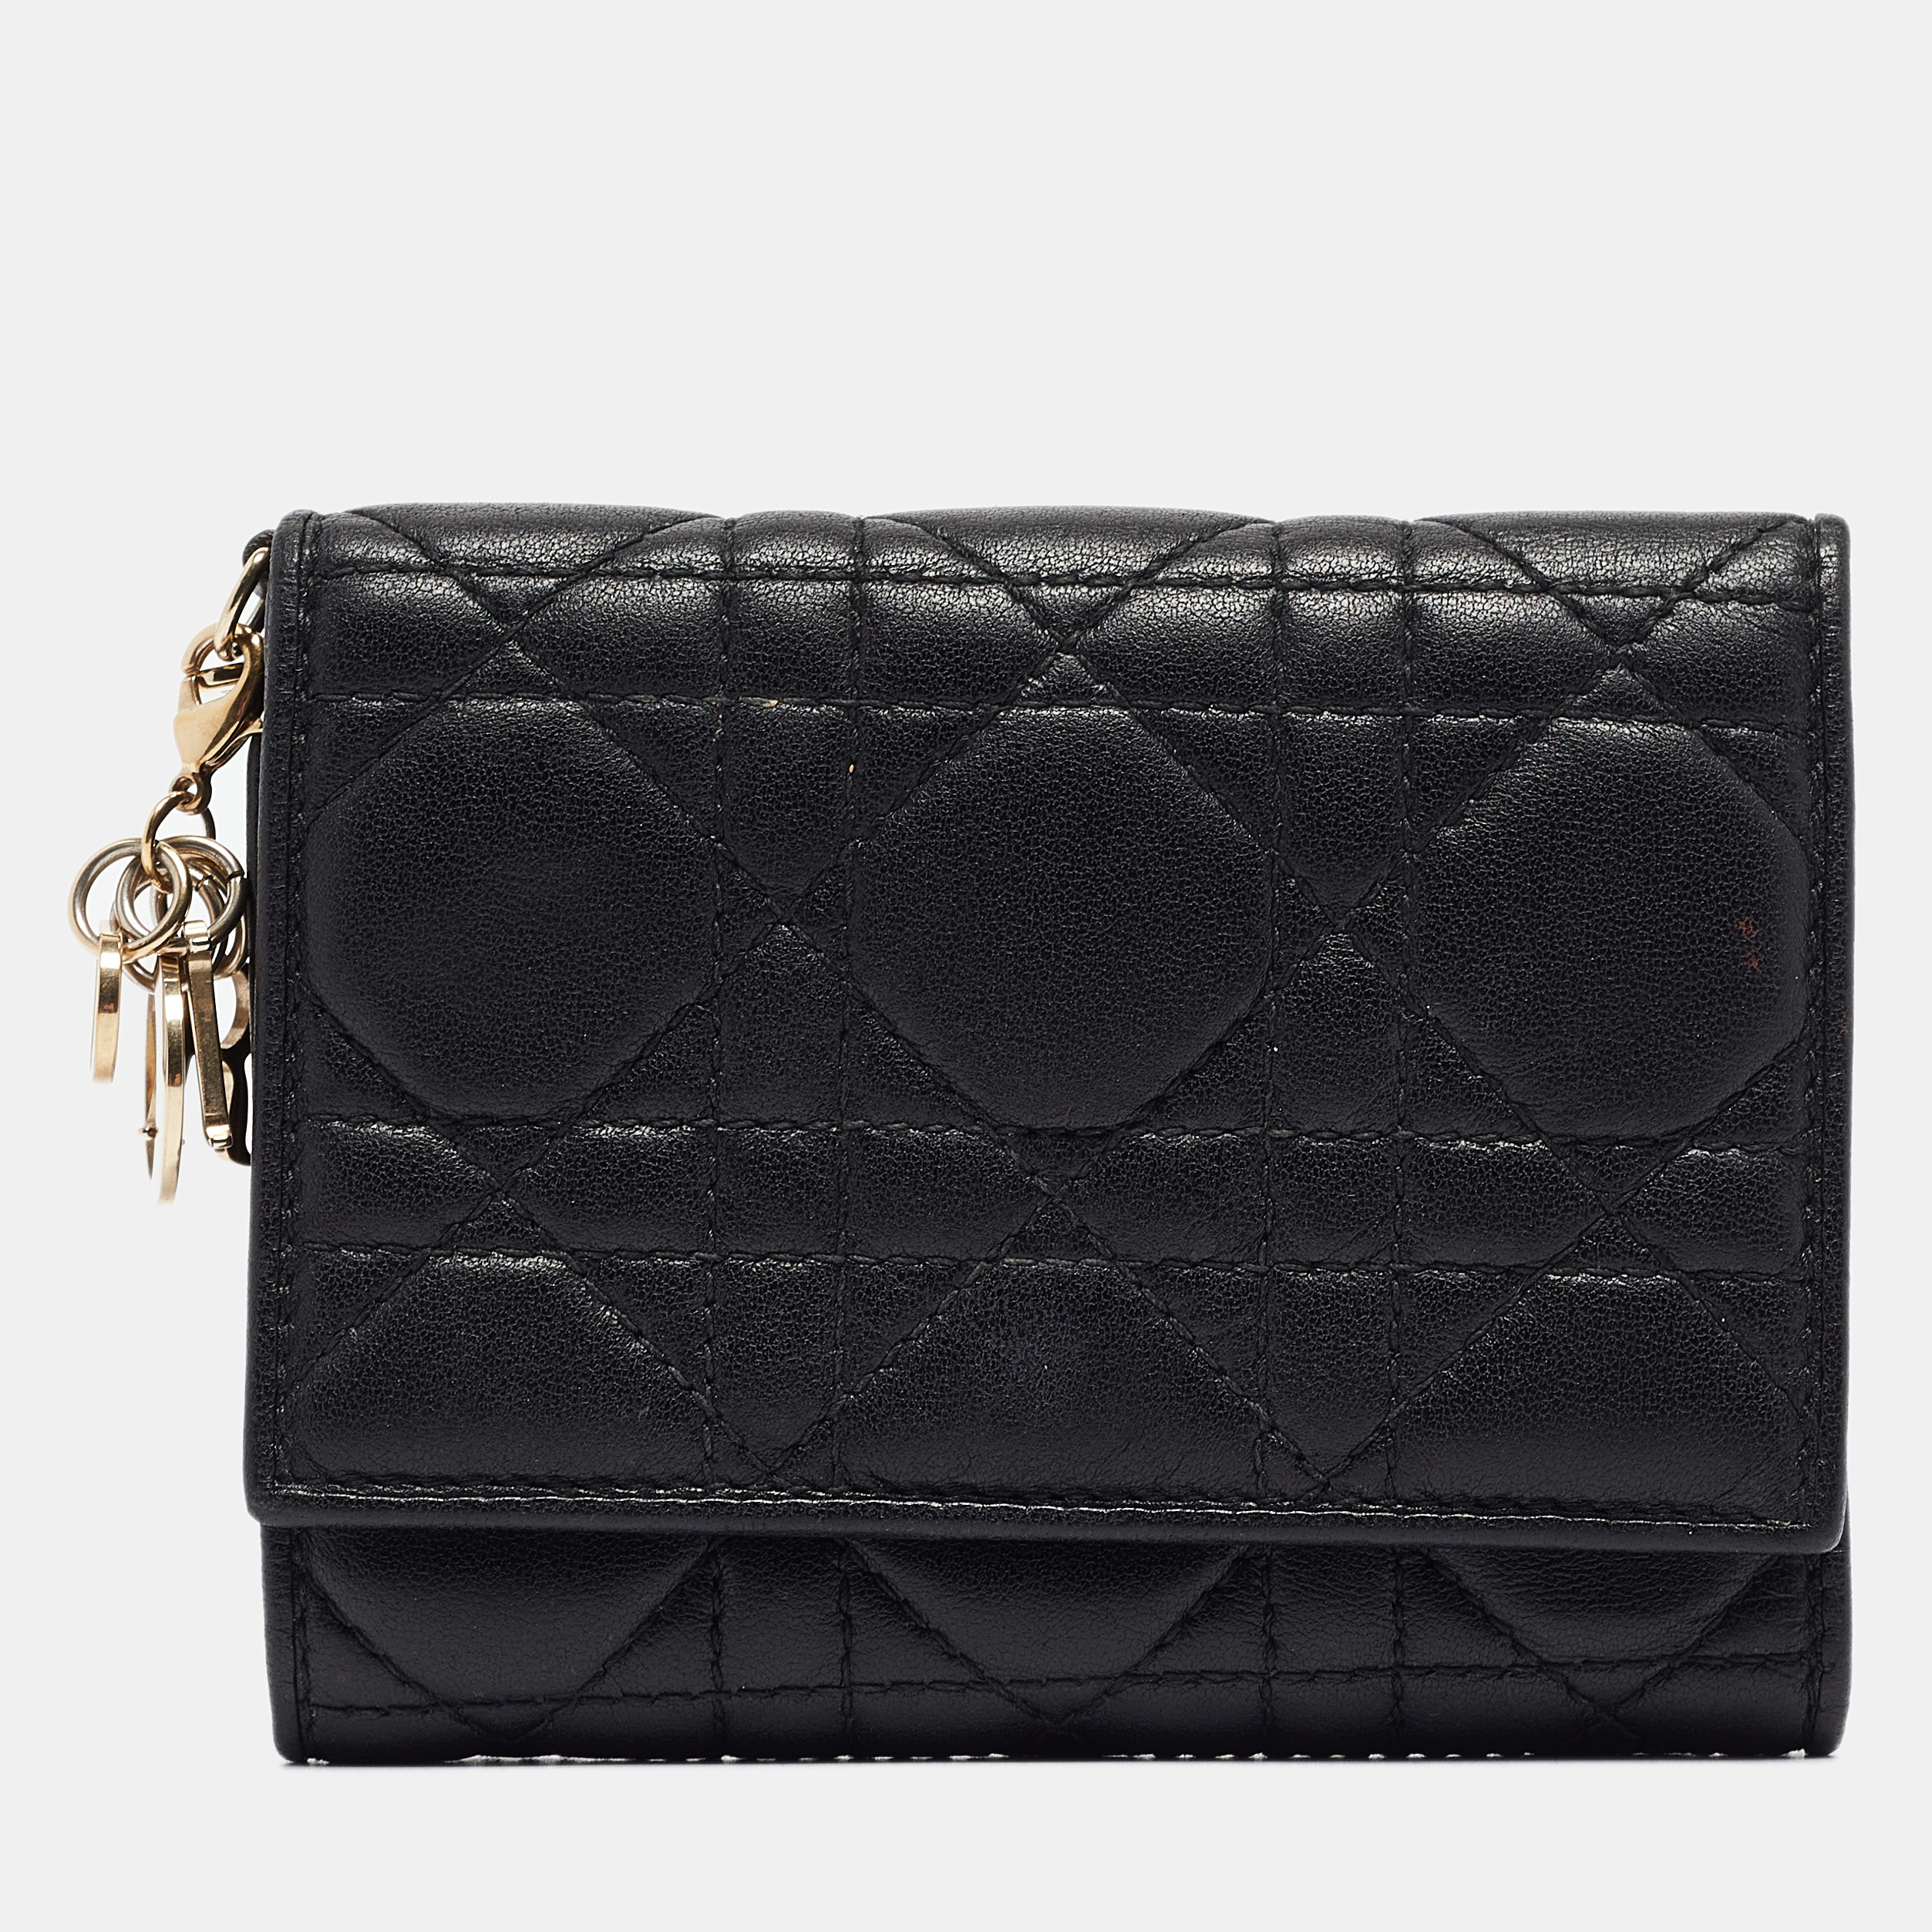 Dior black cannage leather lady dior trifold wallet